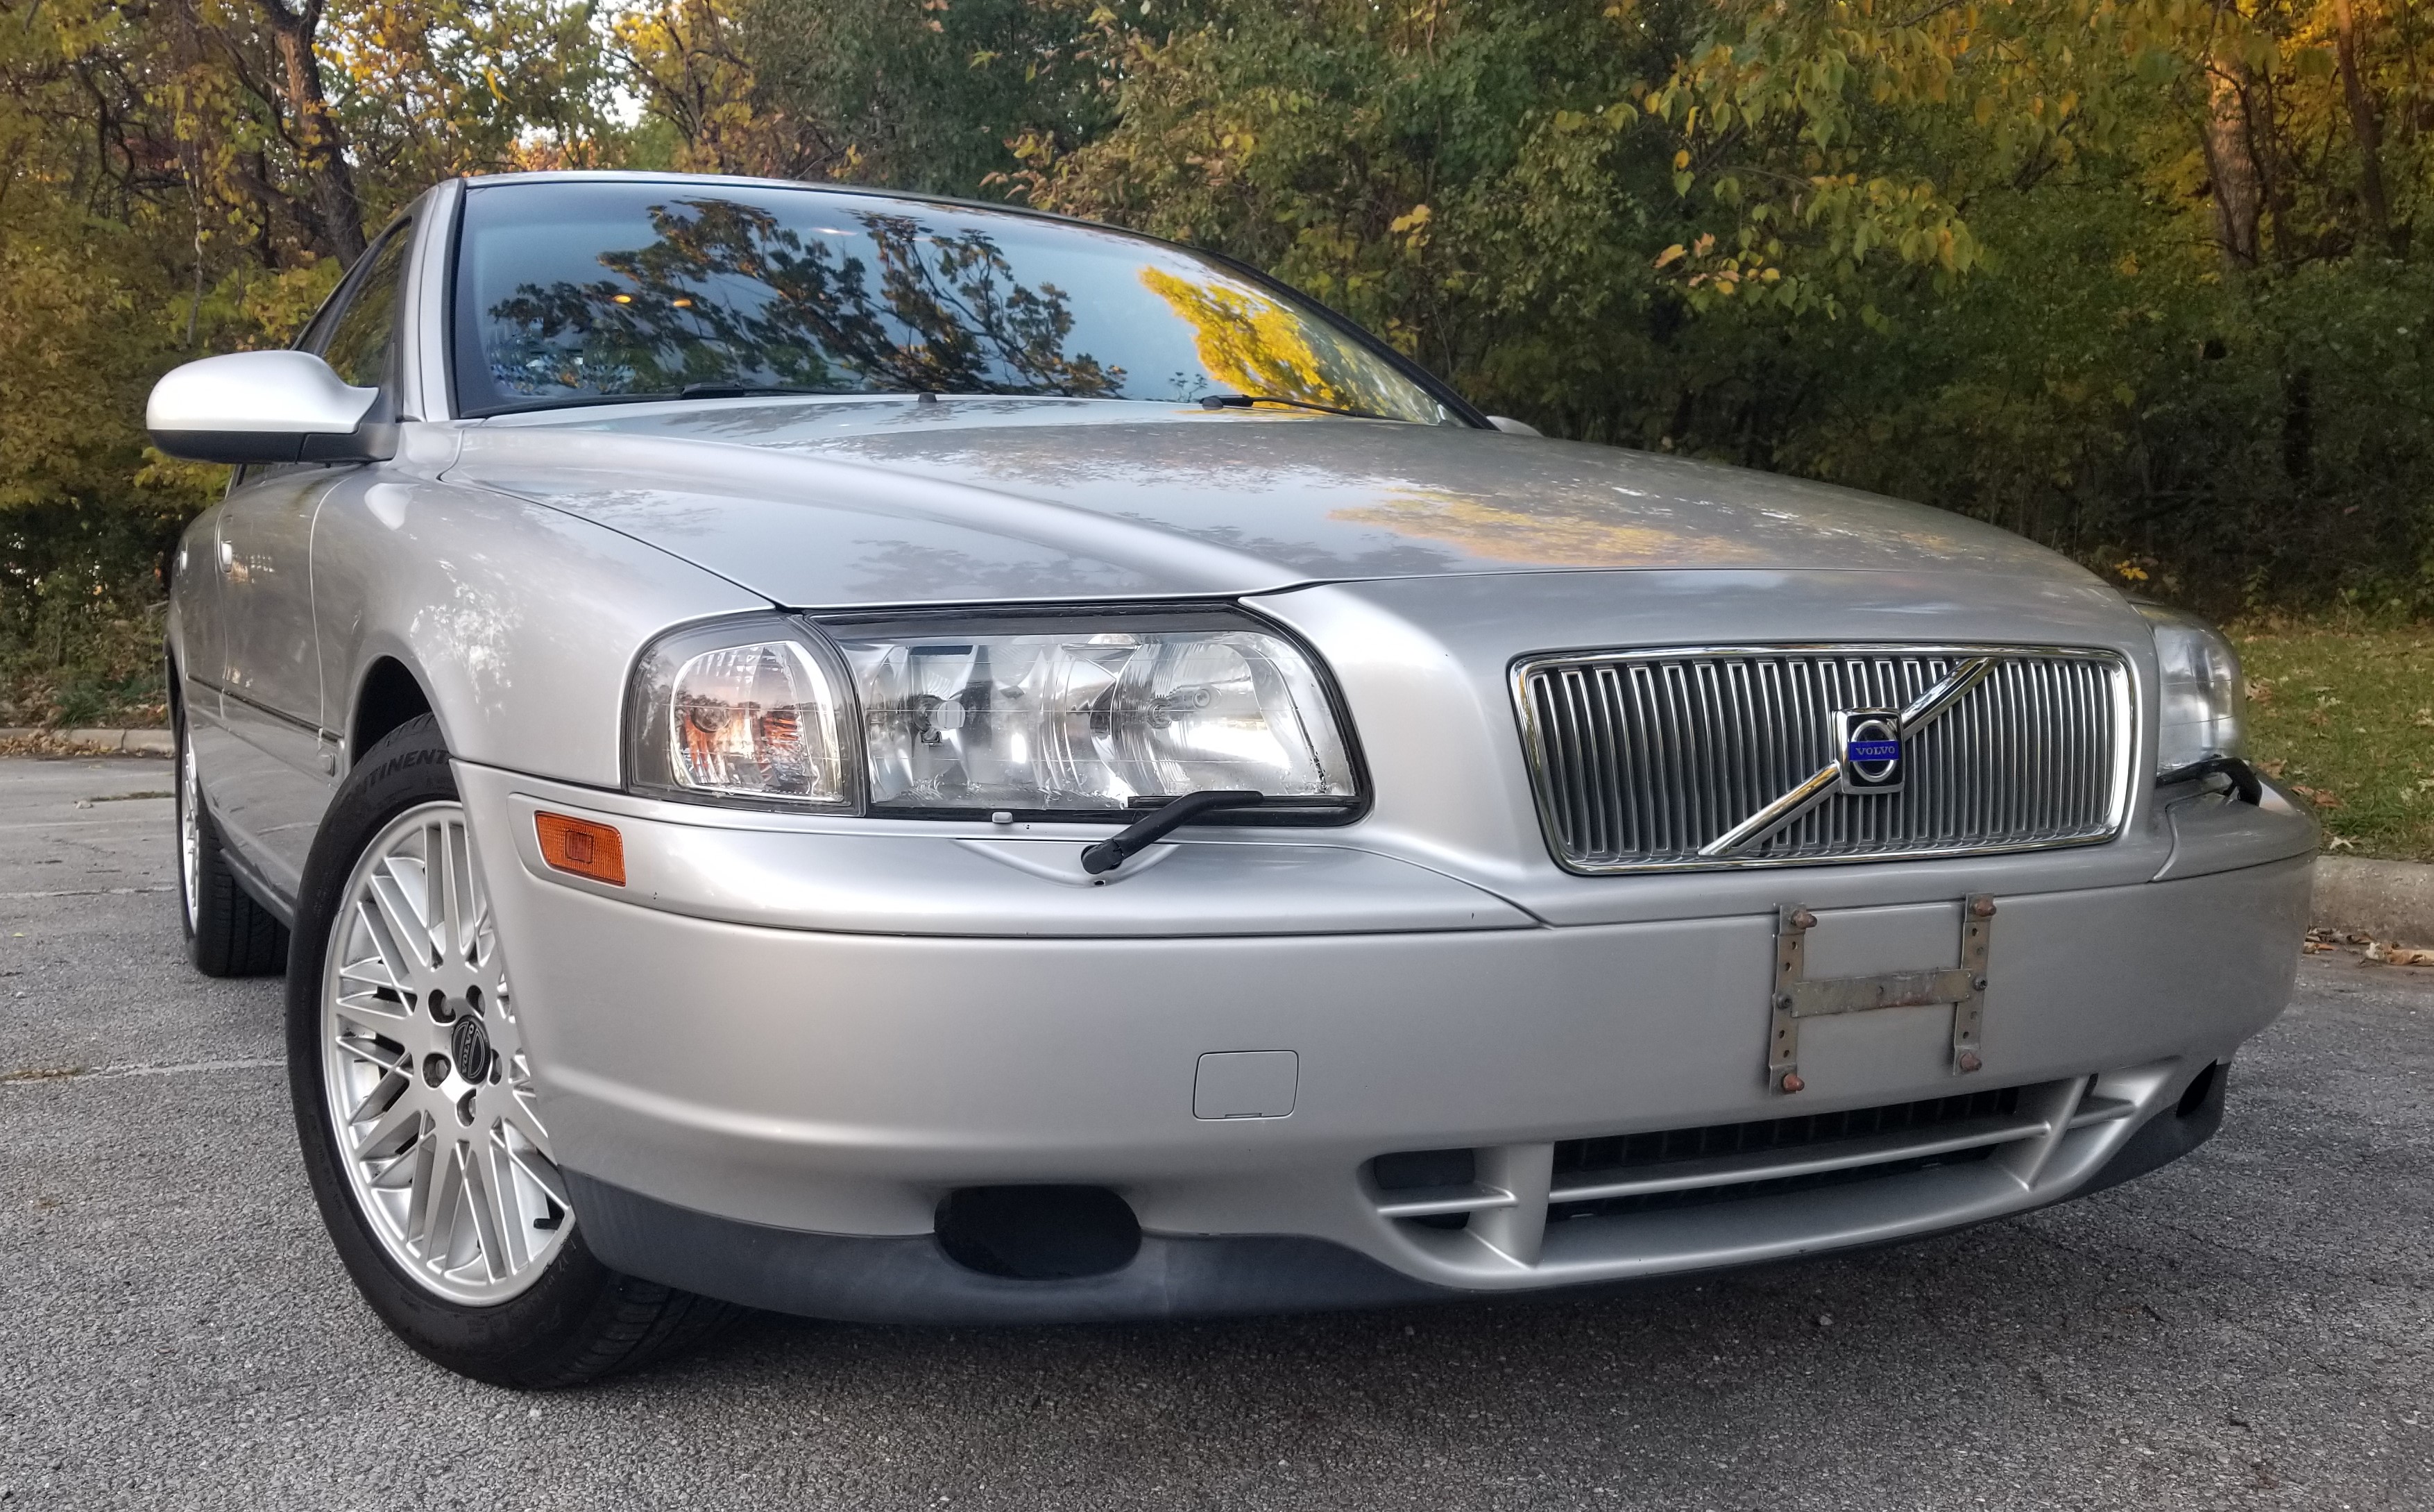 2002 Volvo S80 for Sale by Owner - Kelley Blue Book